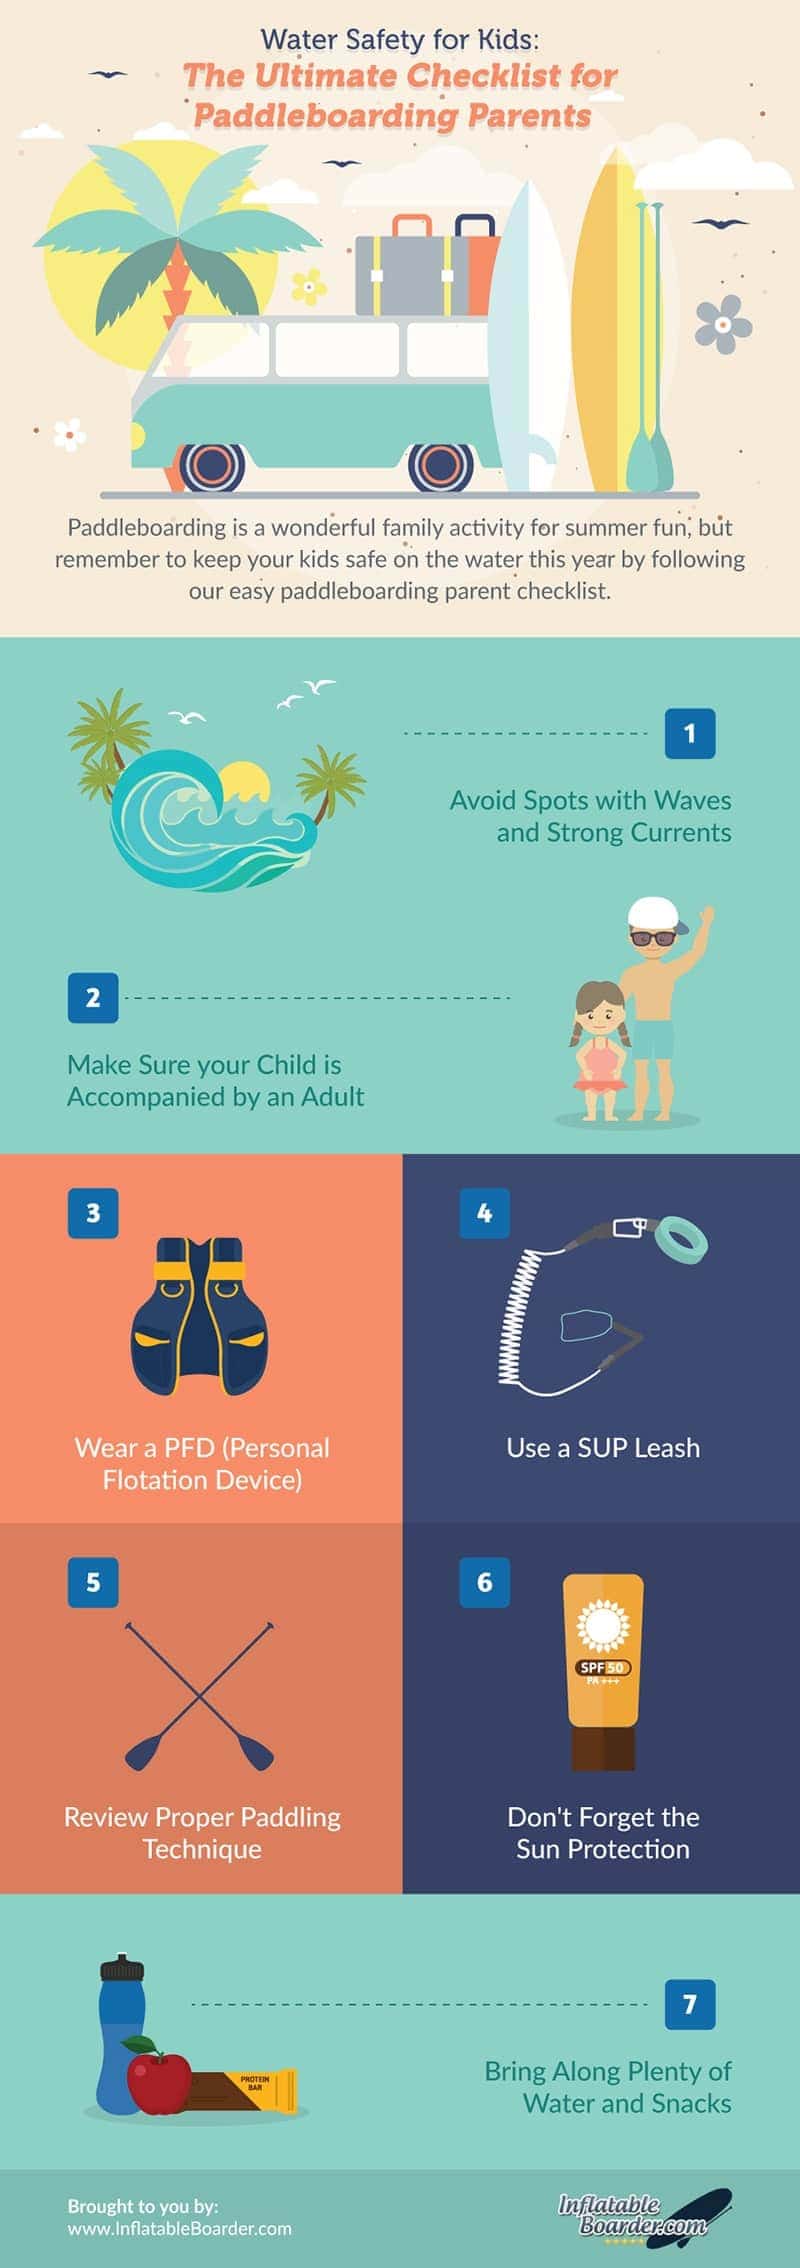 Water Safety for Kids: The Ultimate Checklist for Paddleboarding Parents